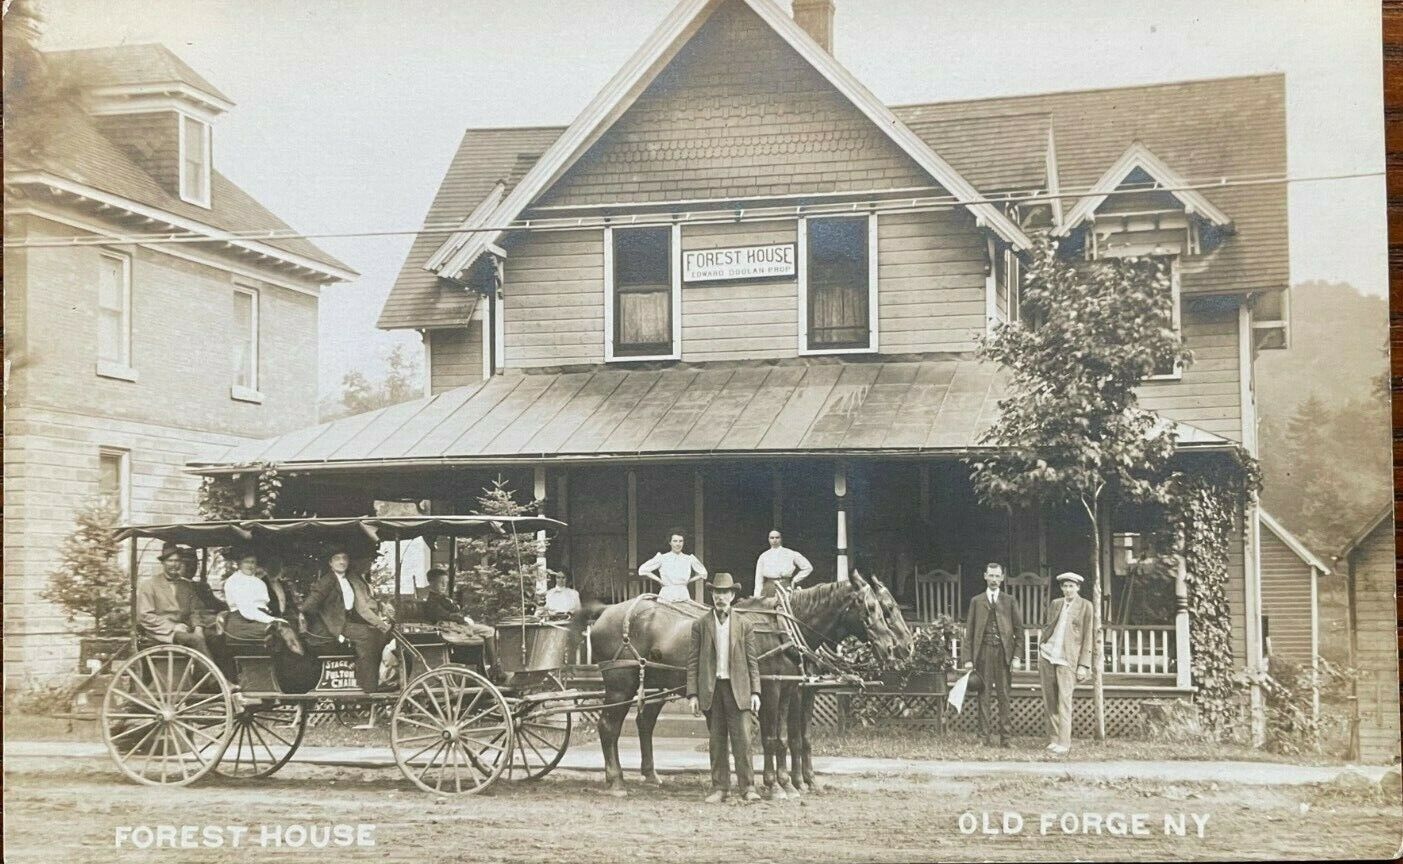 Adirondack RPPC Forest House with People Old Forge NY